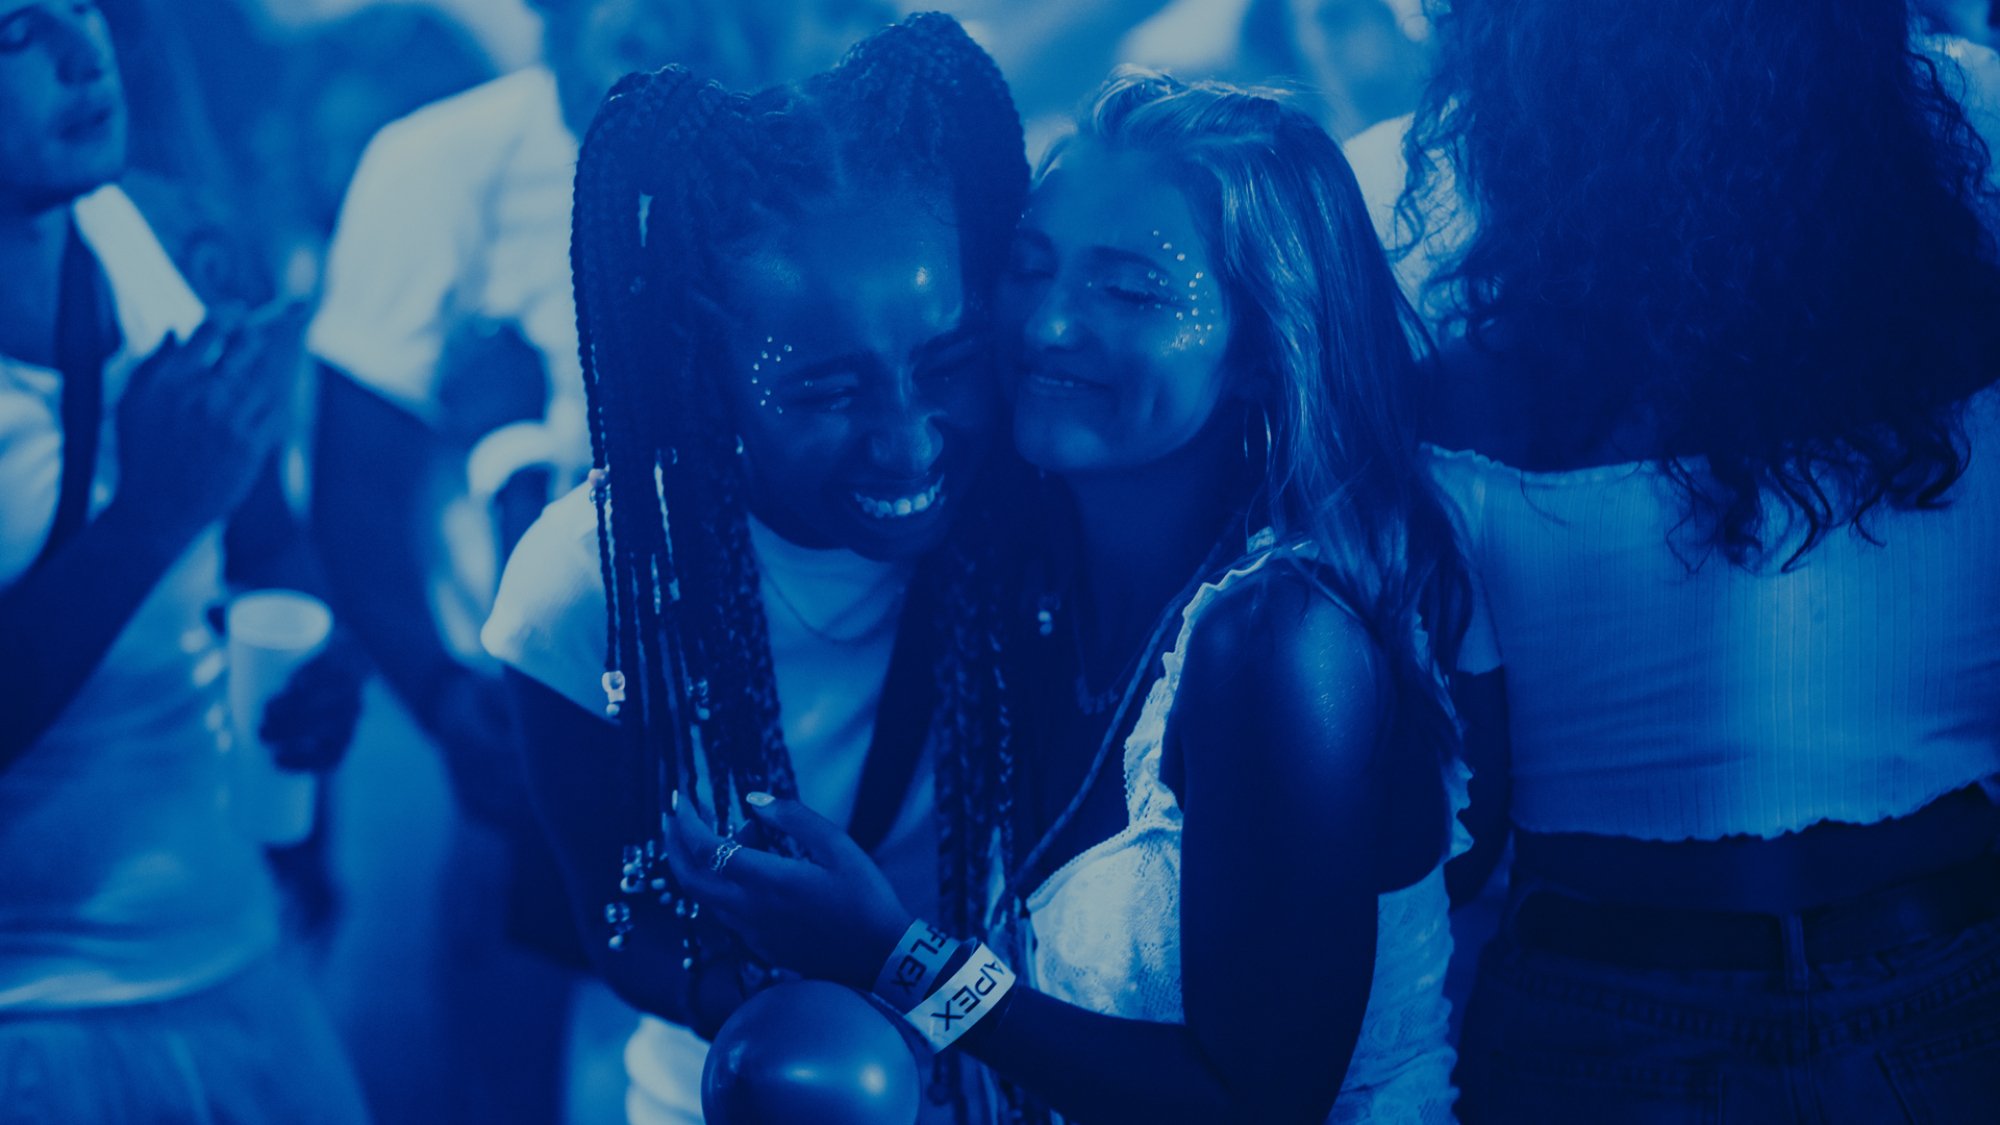 Two girls hug on a dancefloor with their eyes closed smiling.